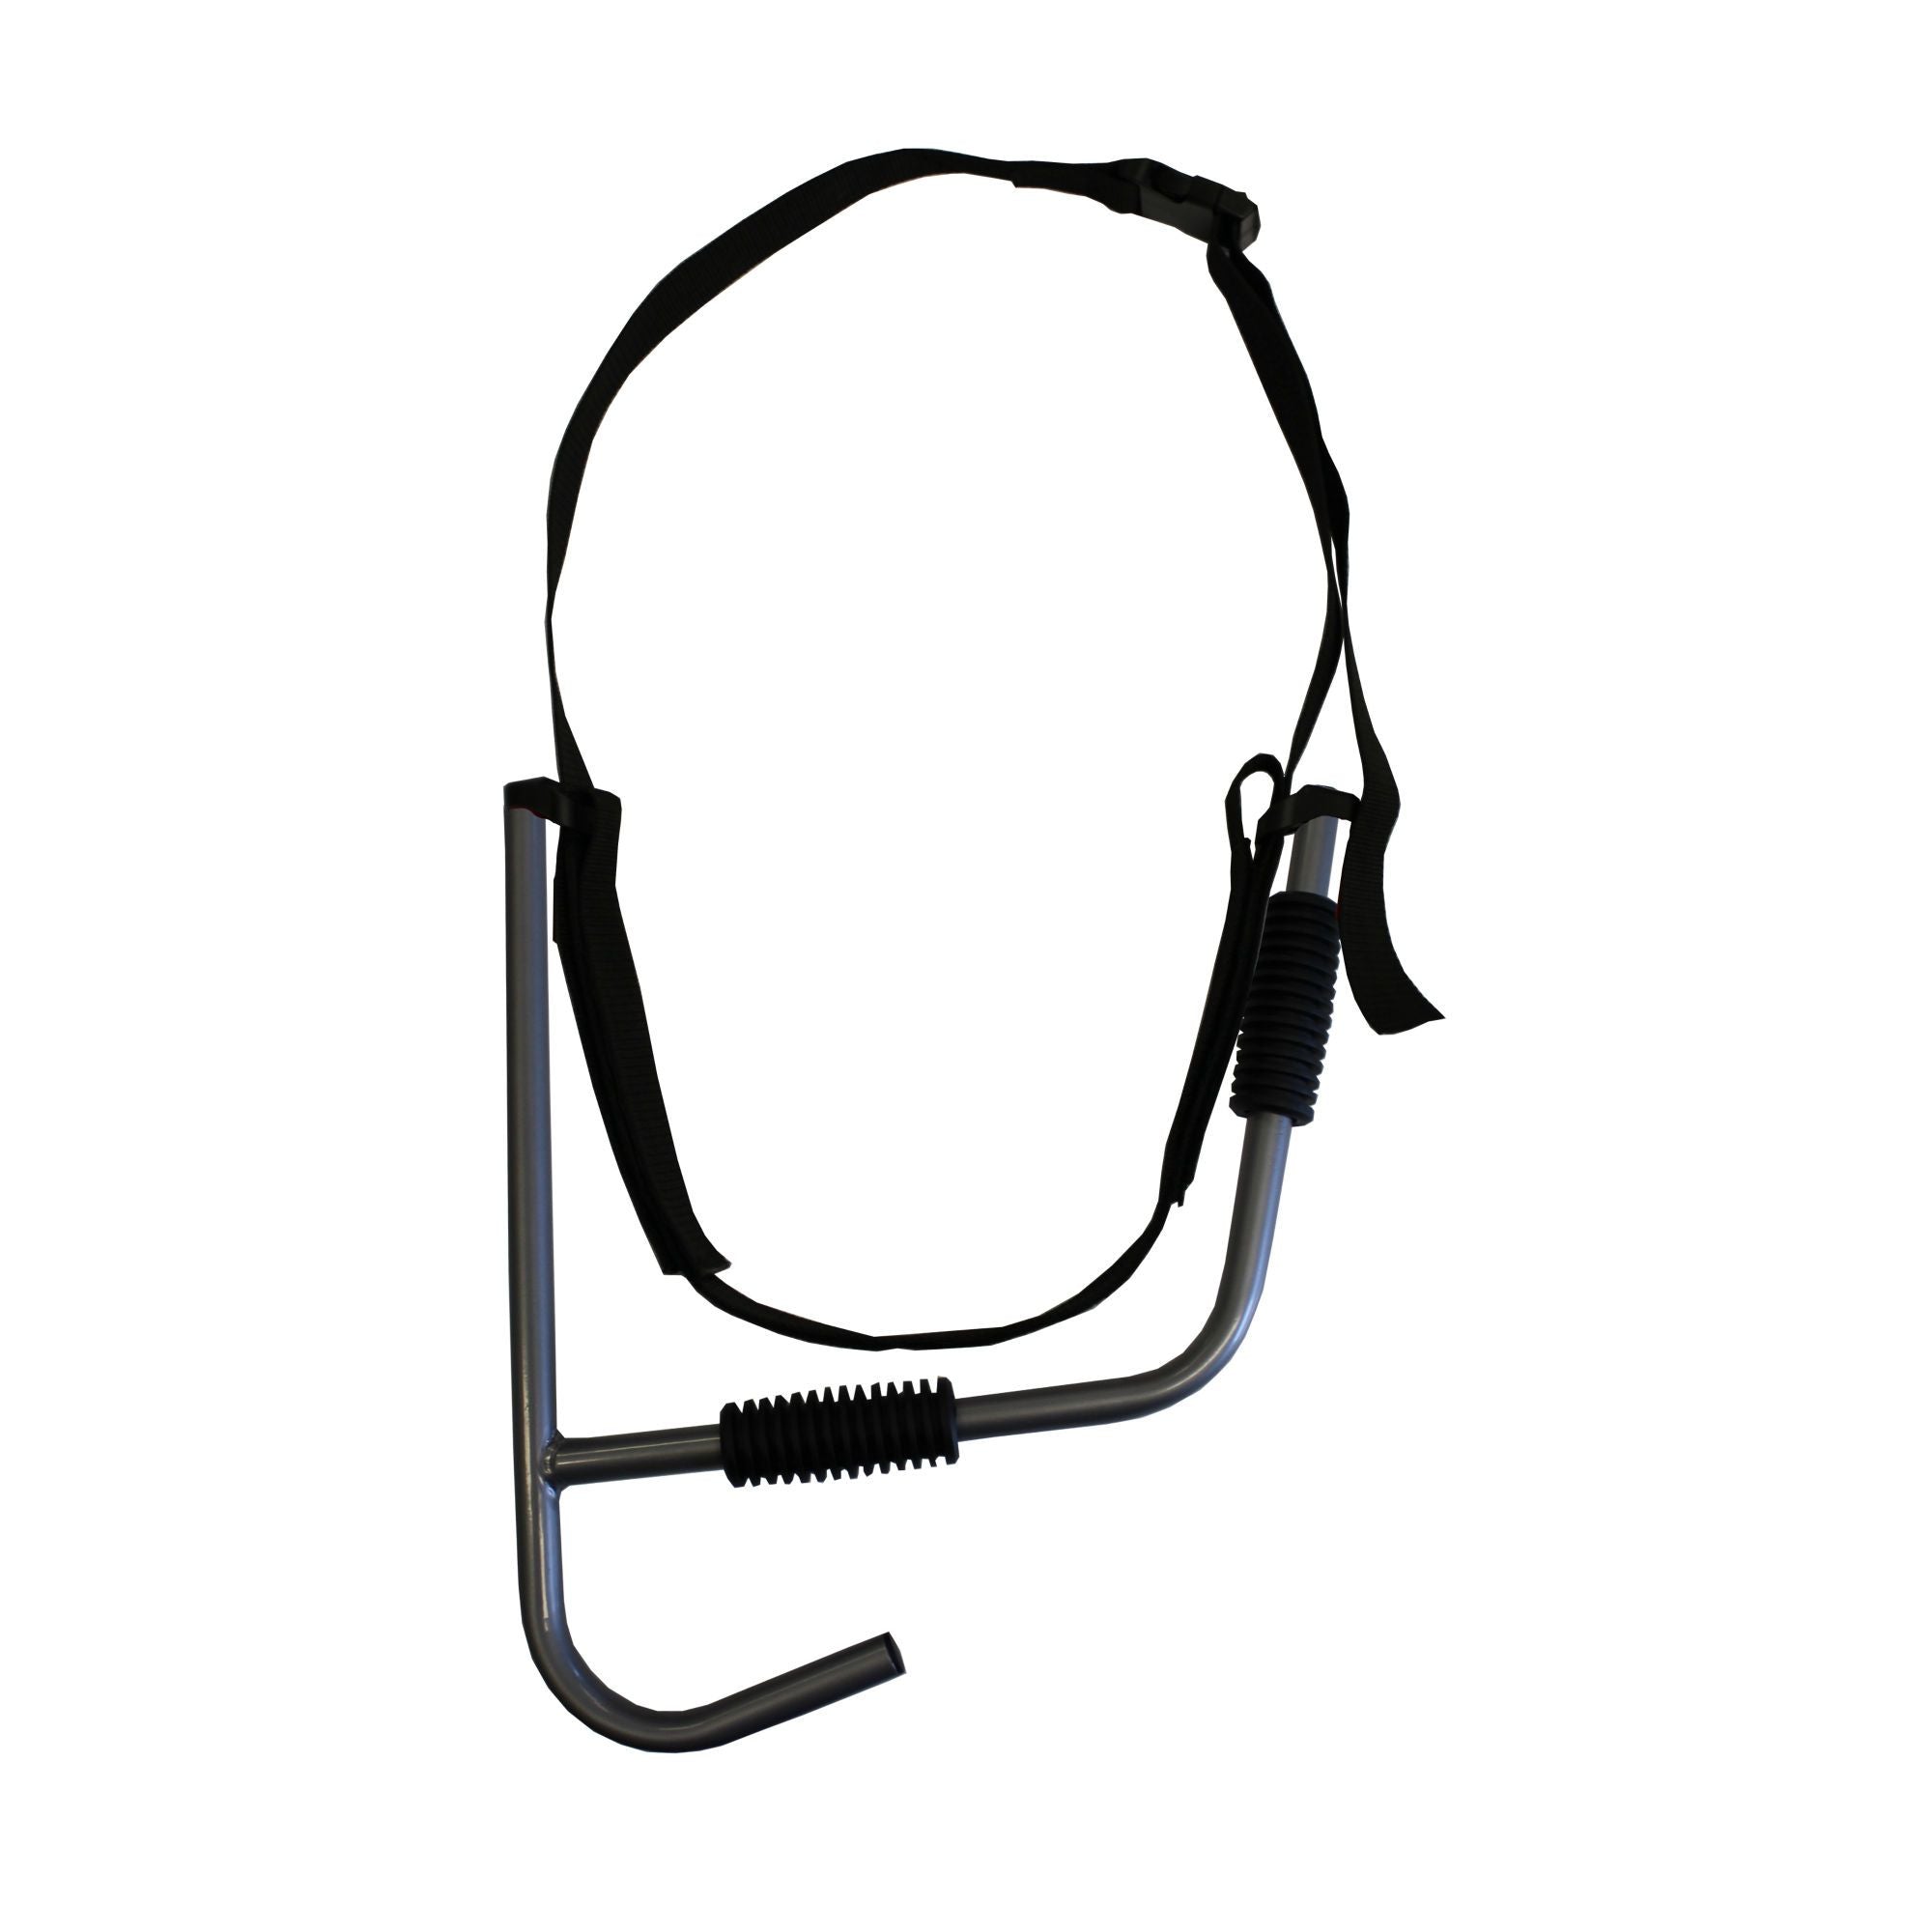 Outlife Kayak Wall Rack With straps